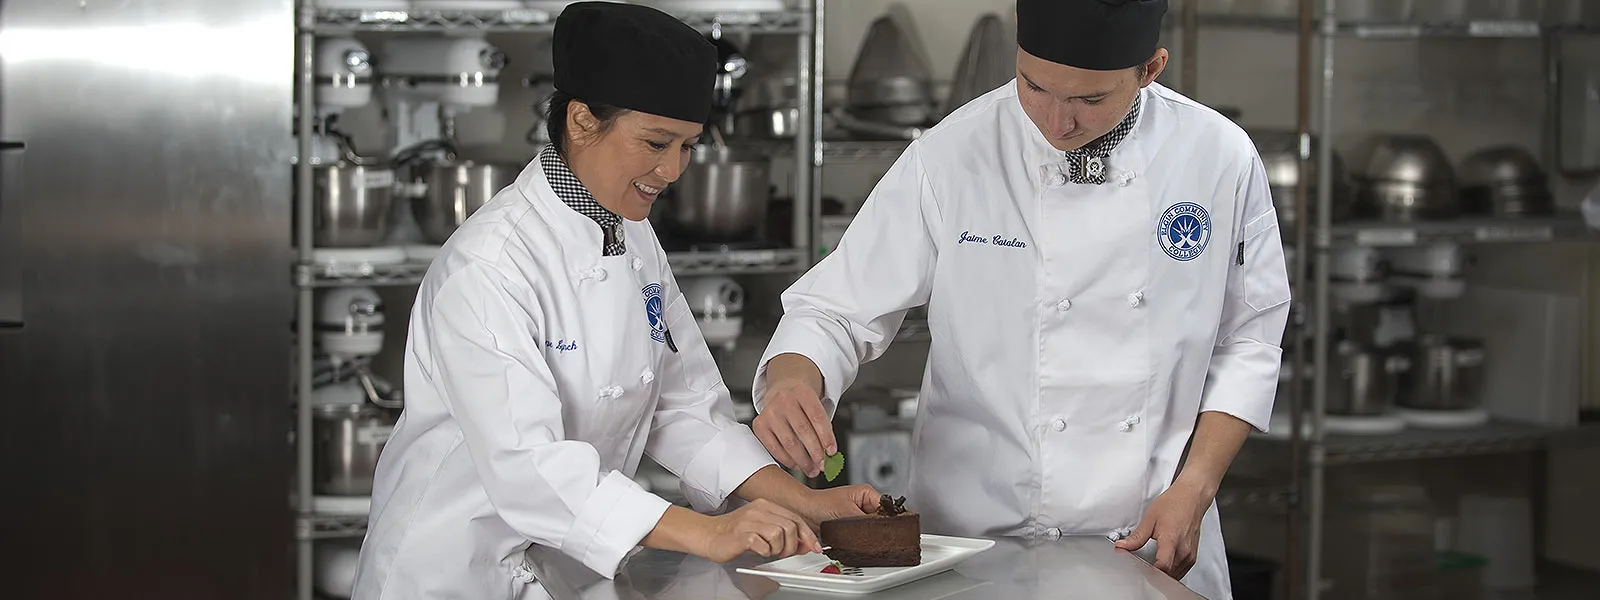 Close-up of pastry chefs preparing a dessert.